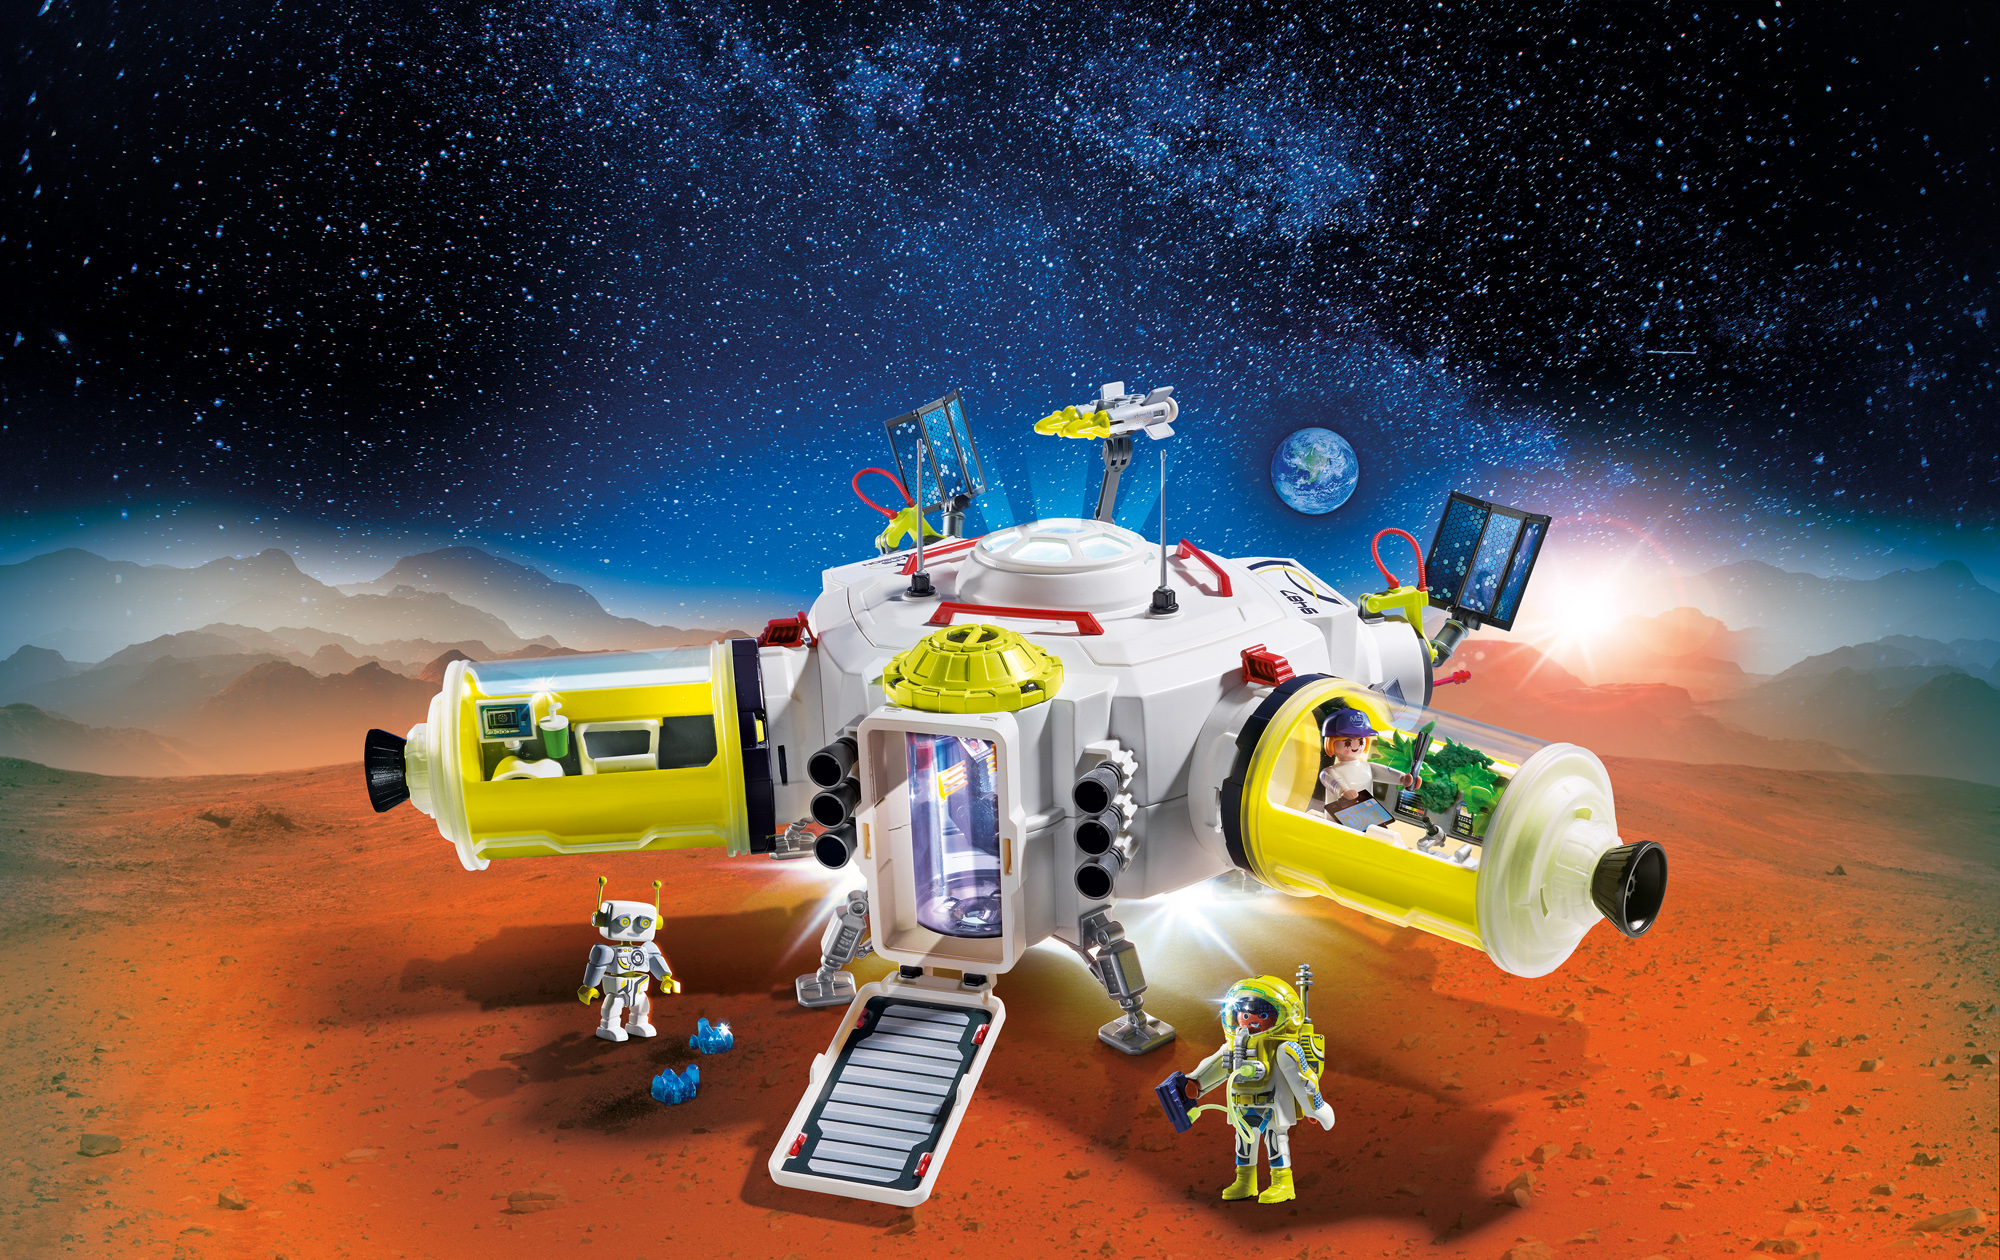 PLAYMOBIL Mars Space Station - image 3 of 9